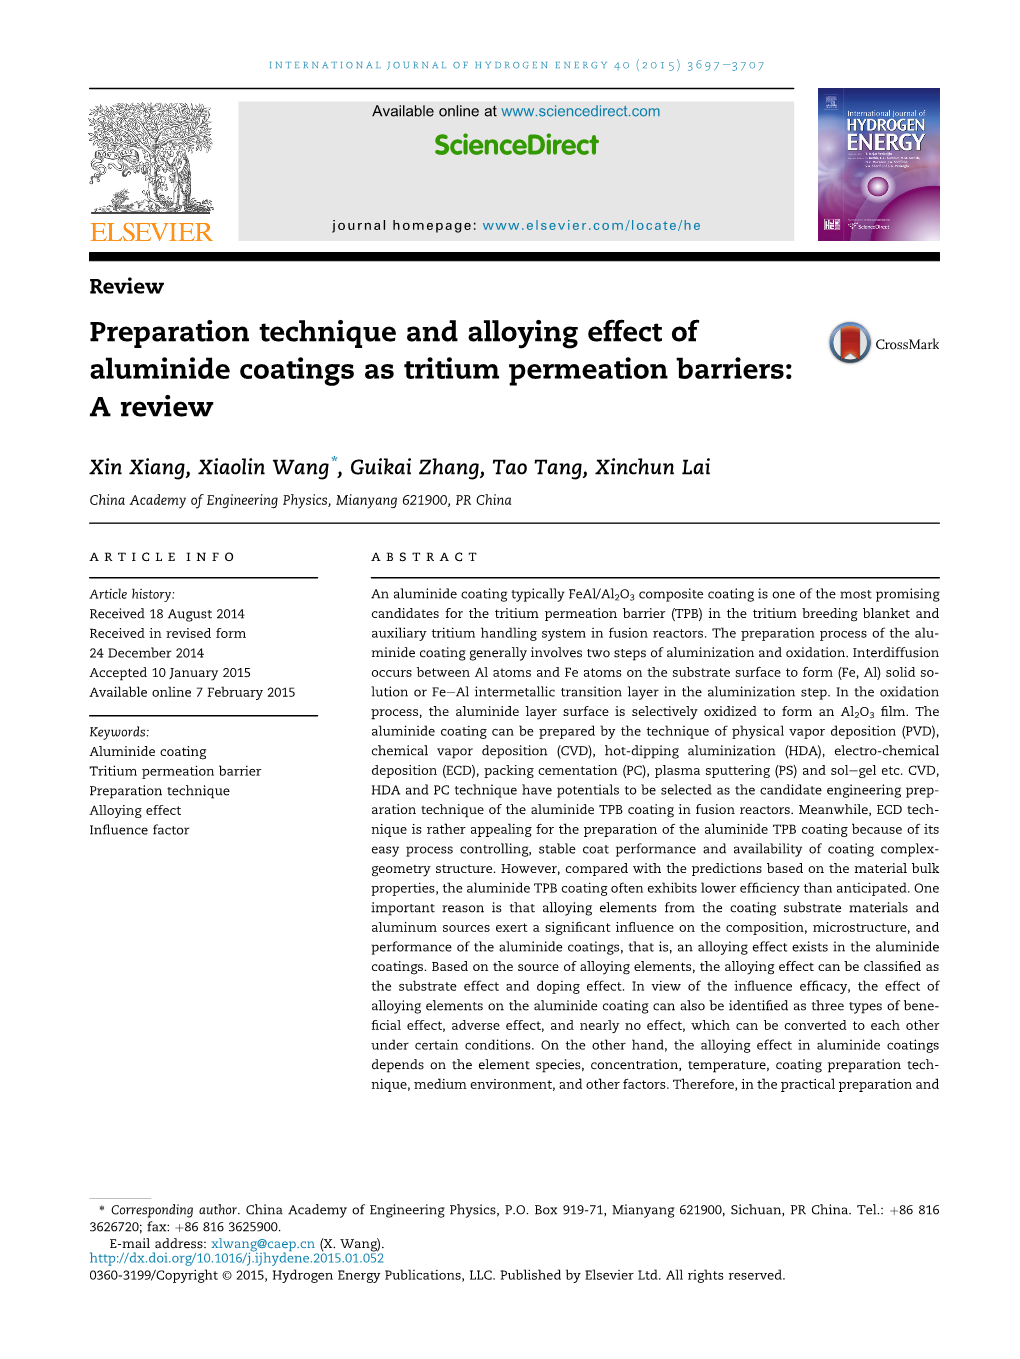 Preparation Technique and Alloying Effect of Aluminide Coatings As Tritium Permeation Barriers: a Review